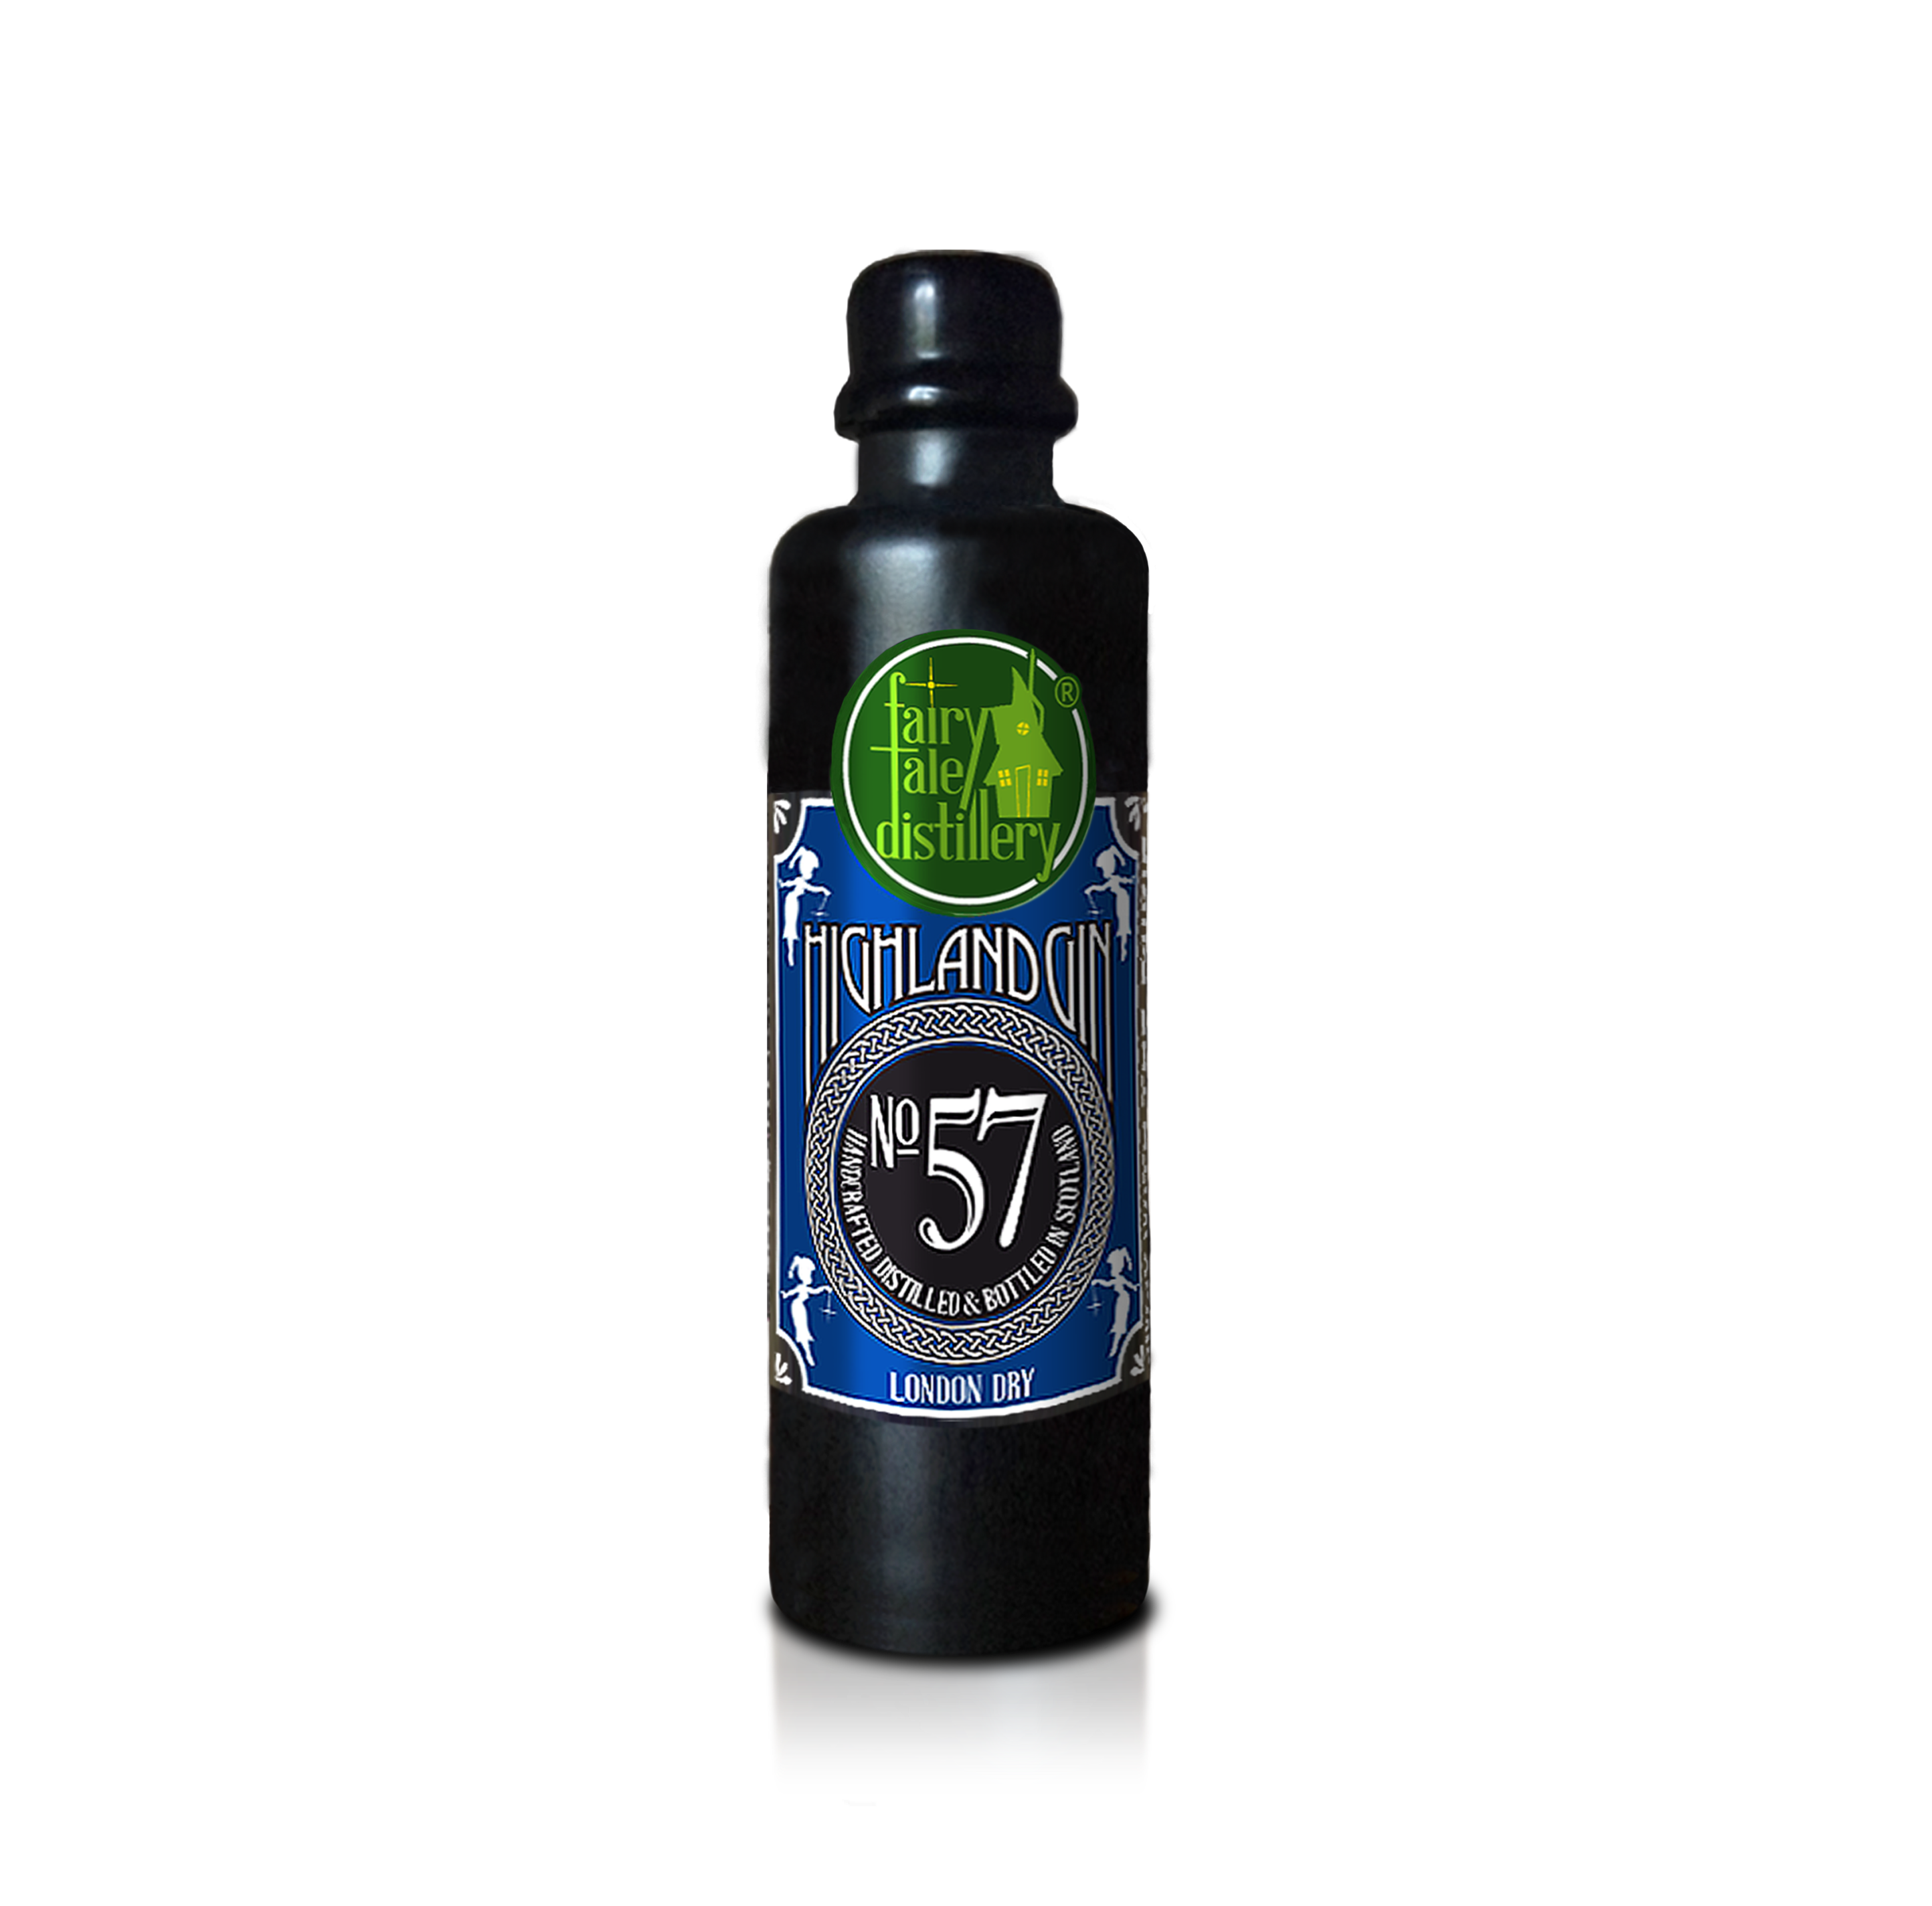 No 57 Classic London Dry Highland Gin bottle 0,2l from Fairytale Distillery